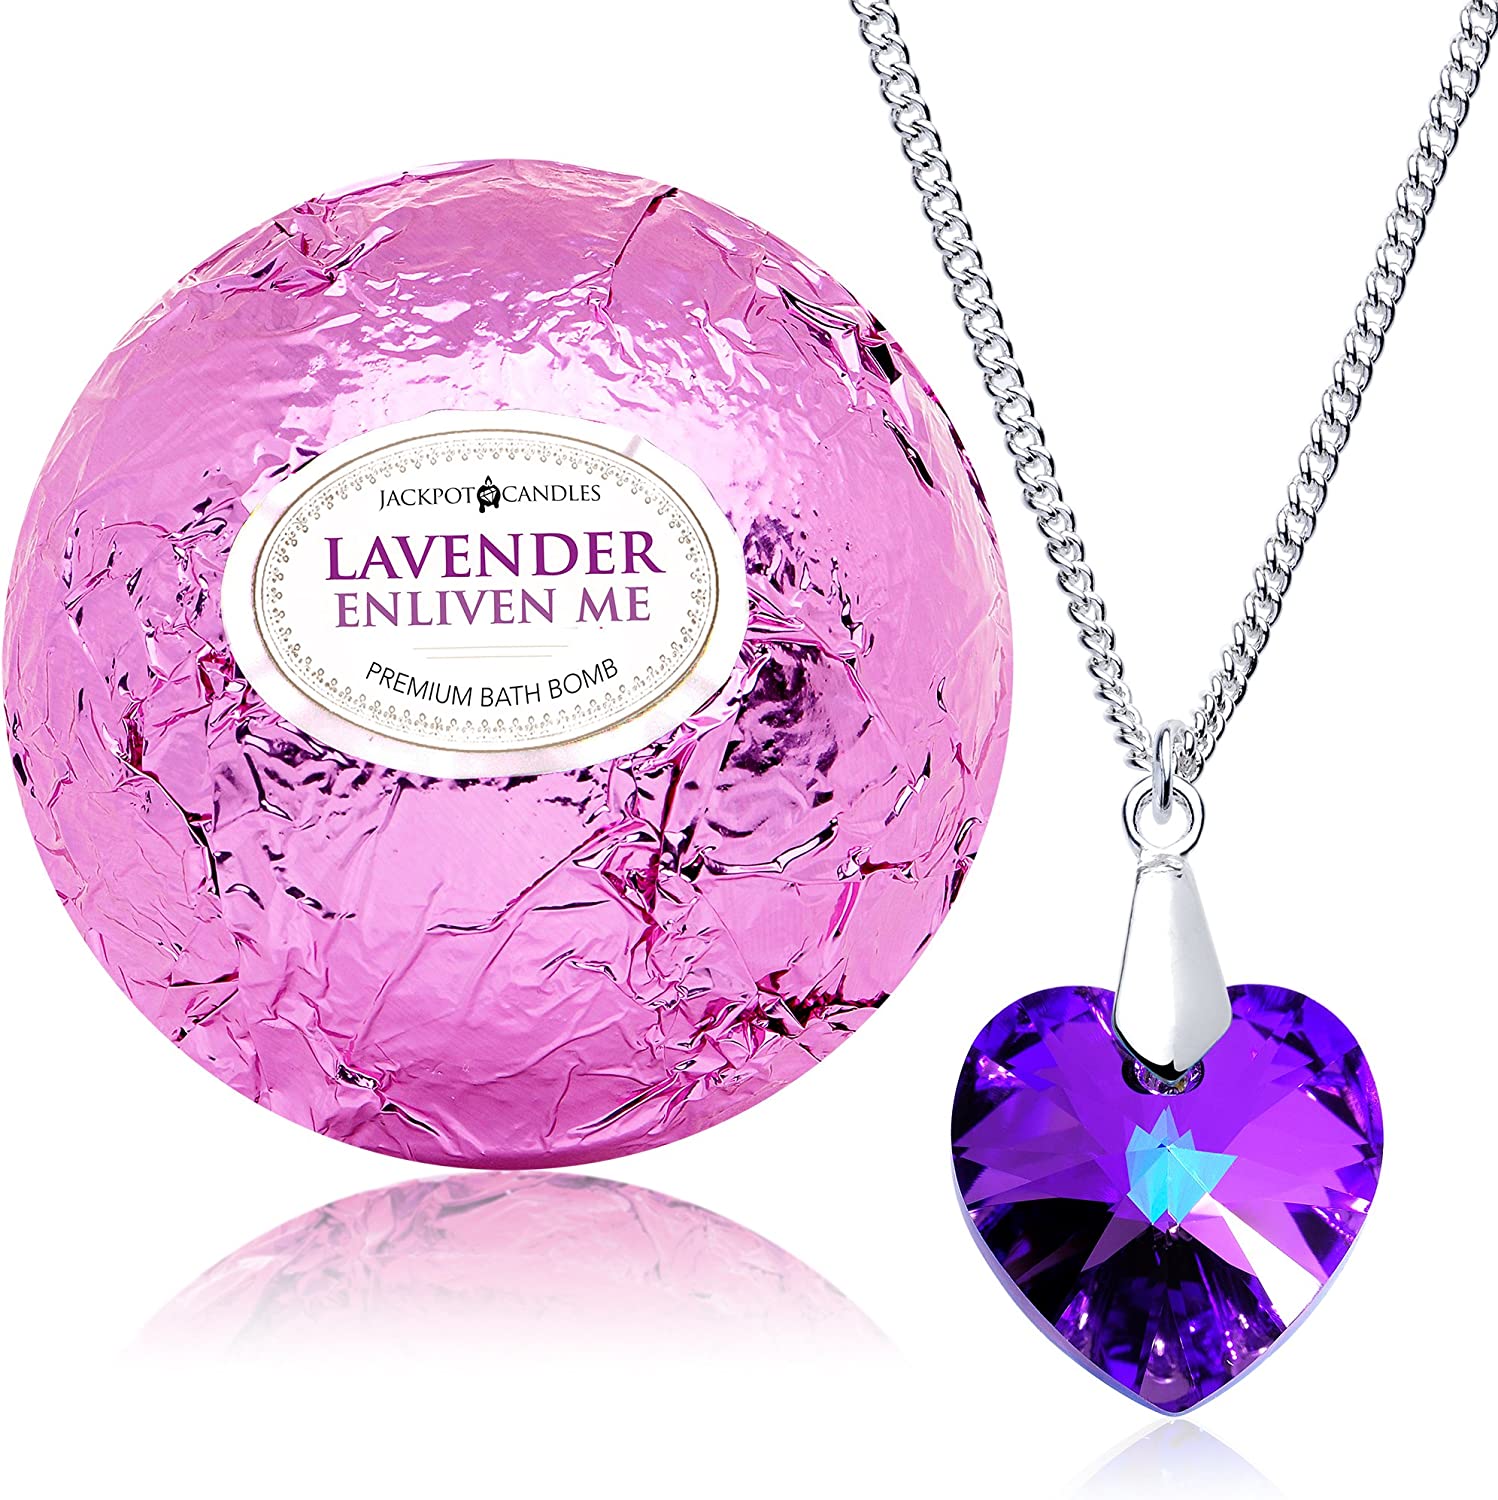 A bath bomb wrapped in purple foil with text that says, 'Lavender Enliven Me. Premium Bath Bomb.' There is a purple heart shaped necklace next to the bath bomb.